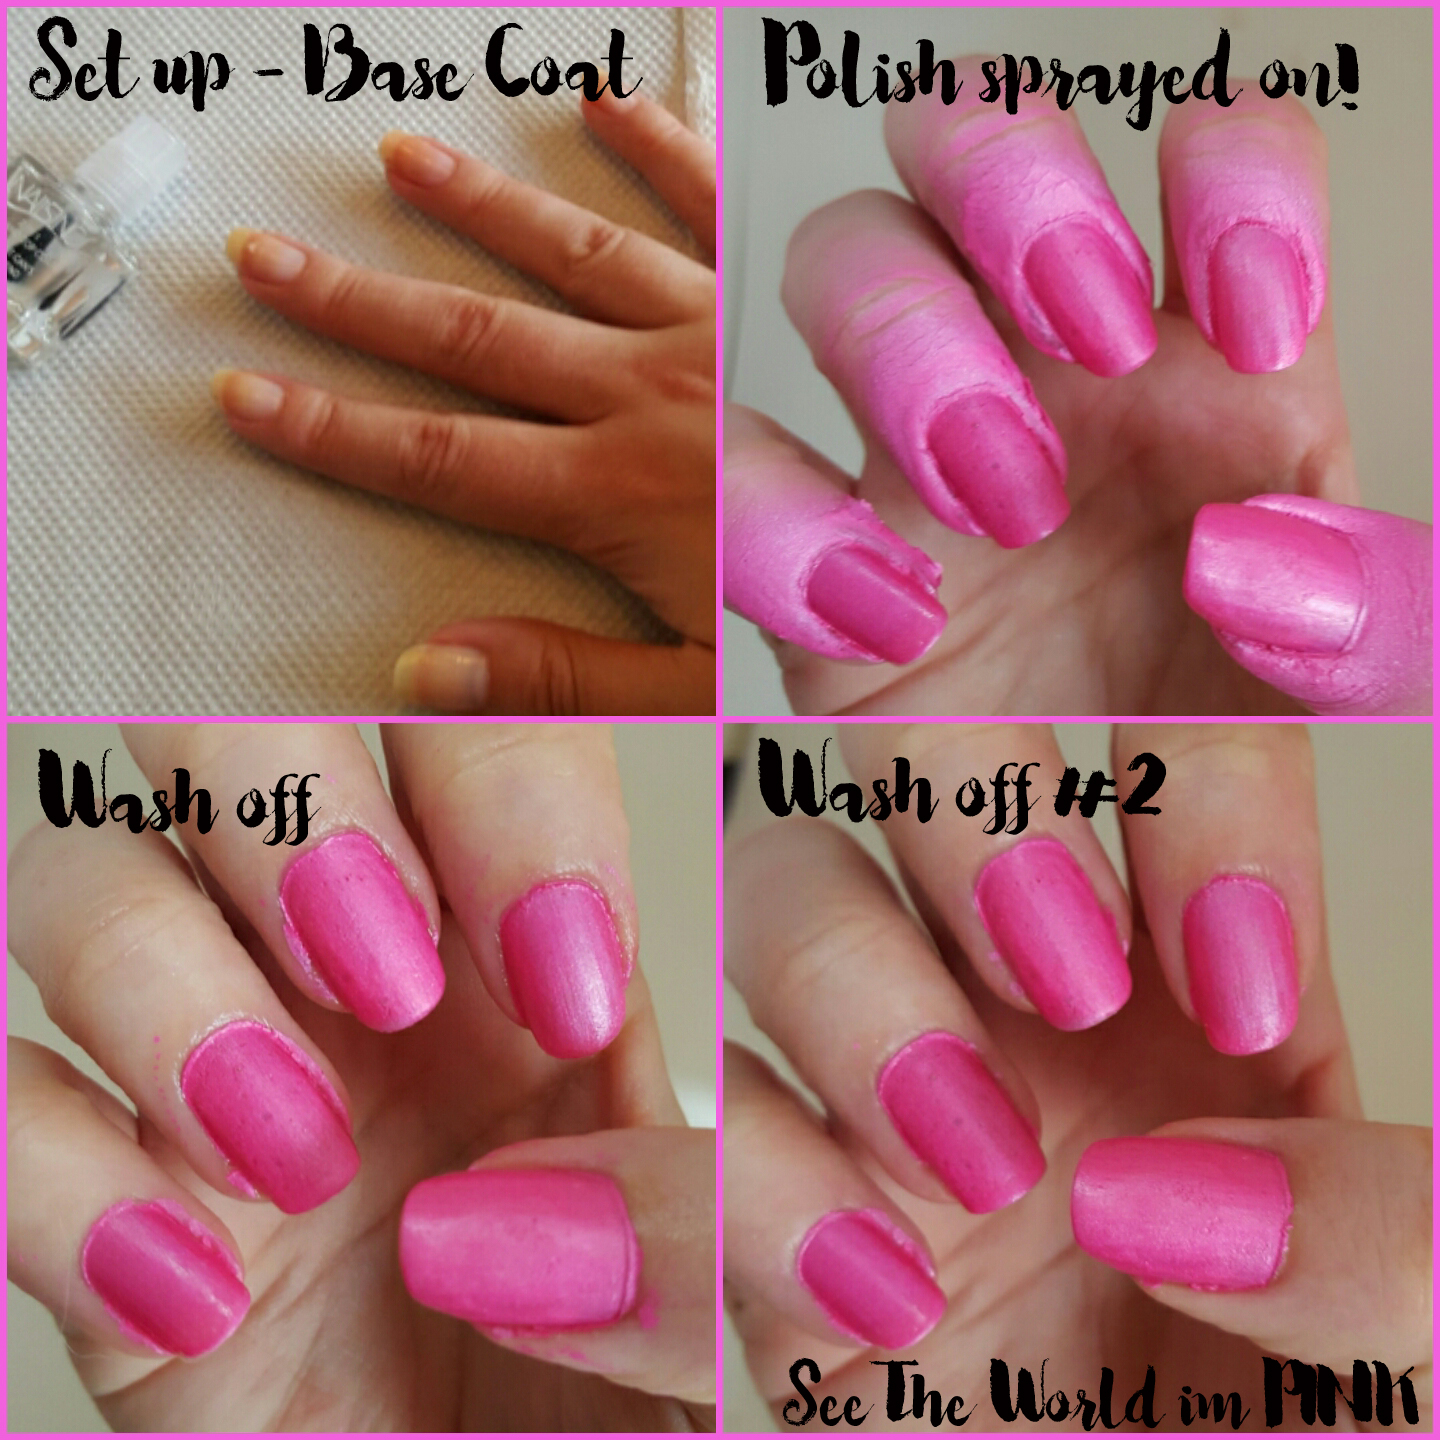 Nails Inc Paint Can Review (Spray On Polish) + an update 24 hours later